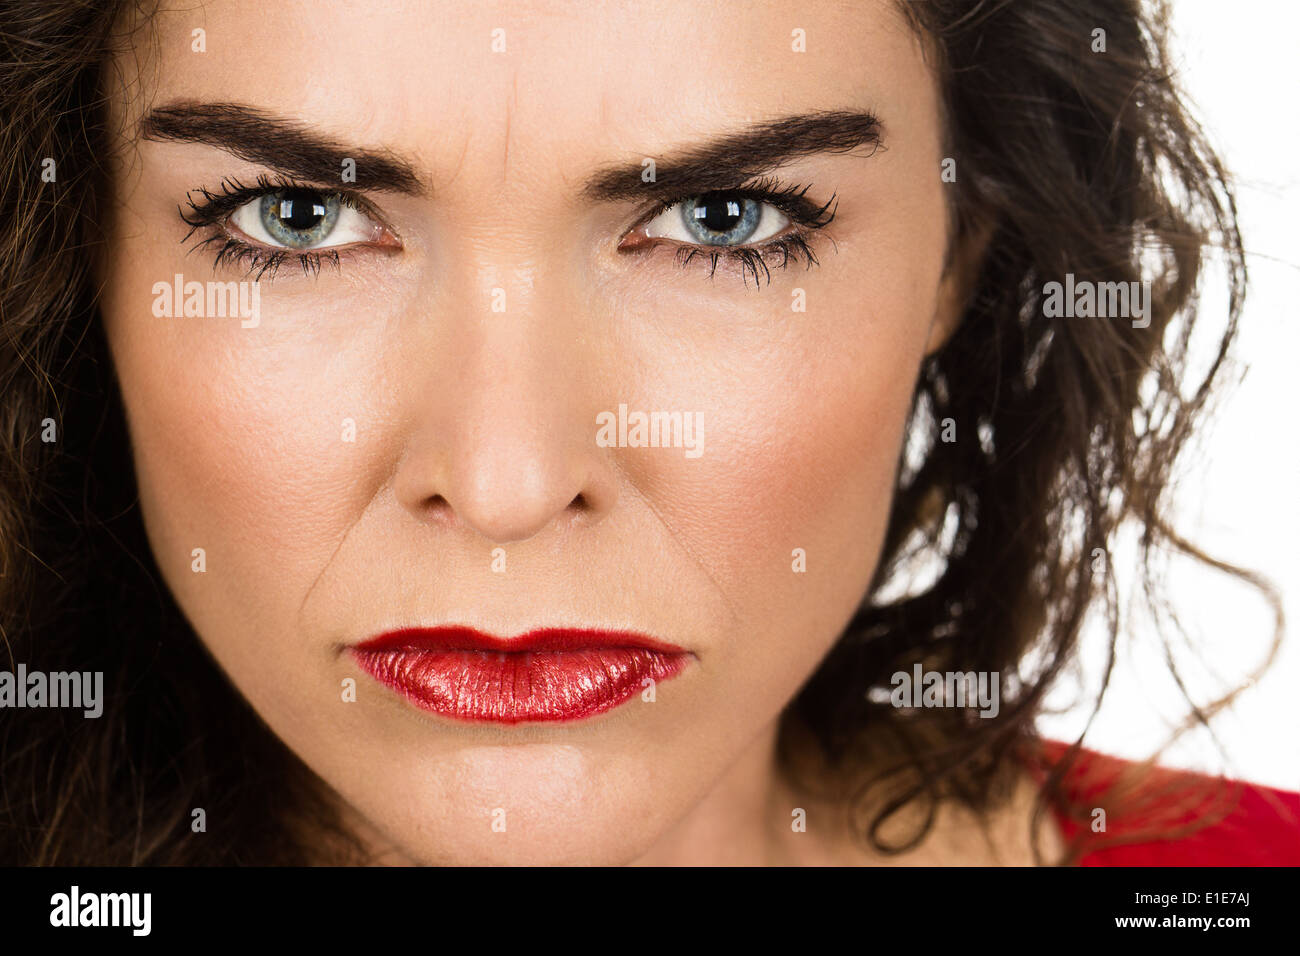 Close-up of a very annoyed and angry woman looking at camera. Stock Photo